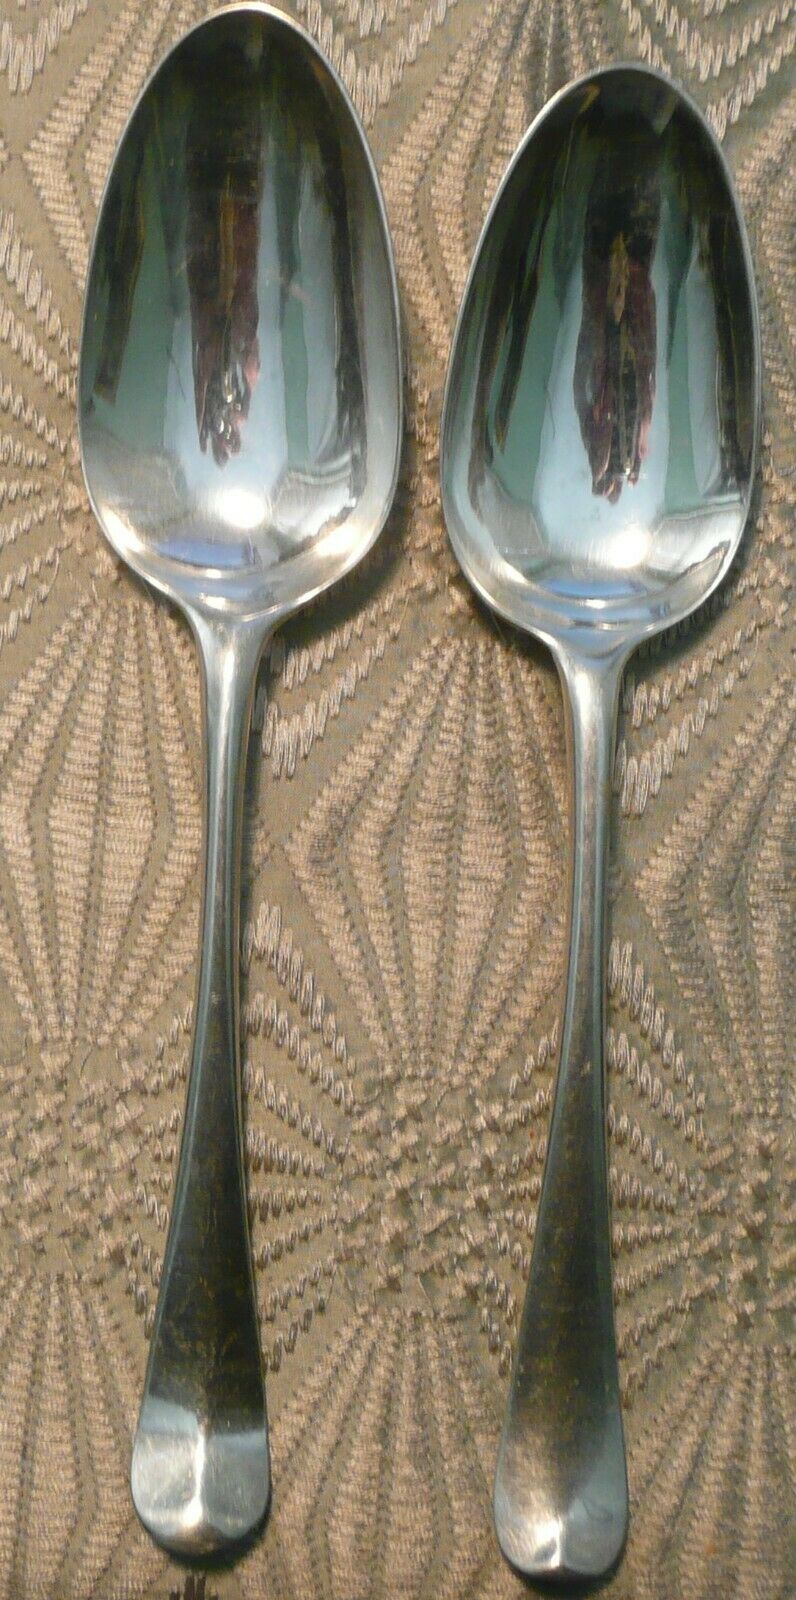 Two George II Solid Silver Rat Tail Spoons by William Turner London 1759